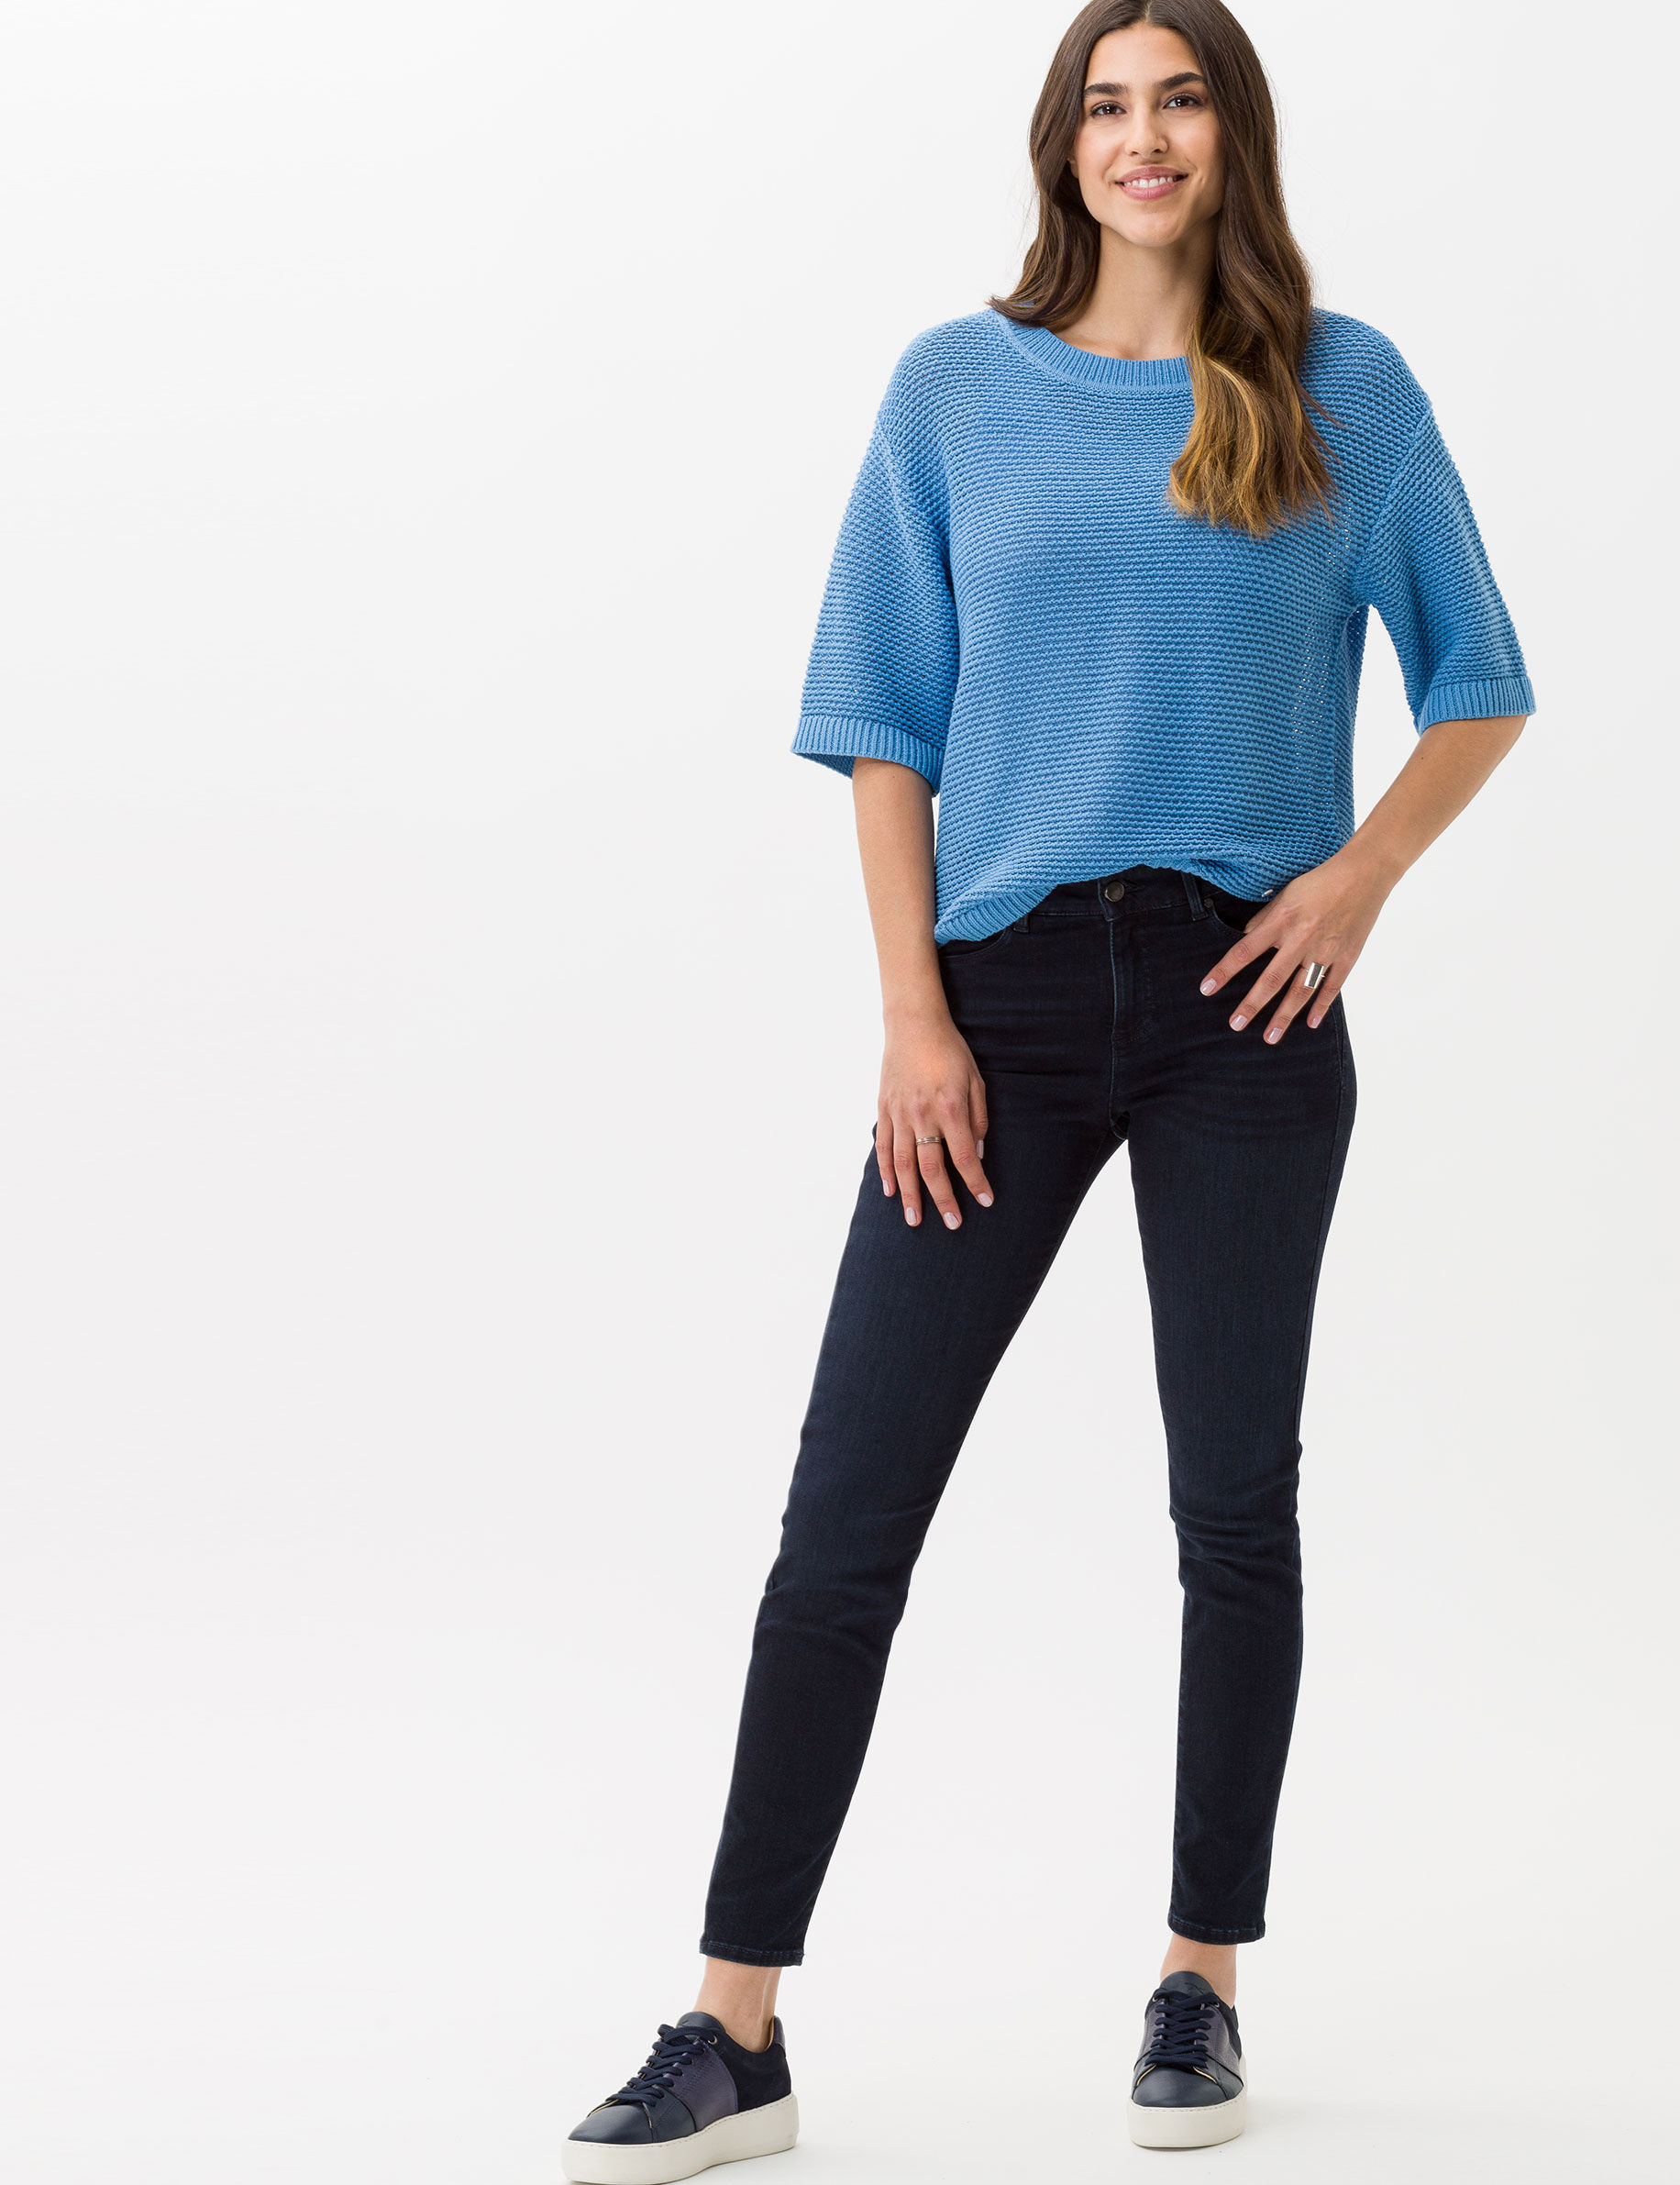 Women Style ANA USED DARK BLUE Skinny Fit Model Outfit